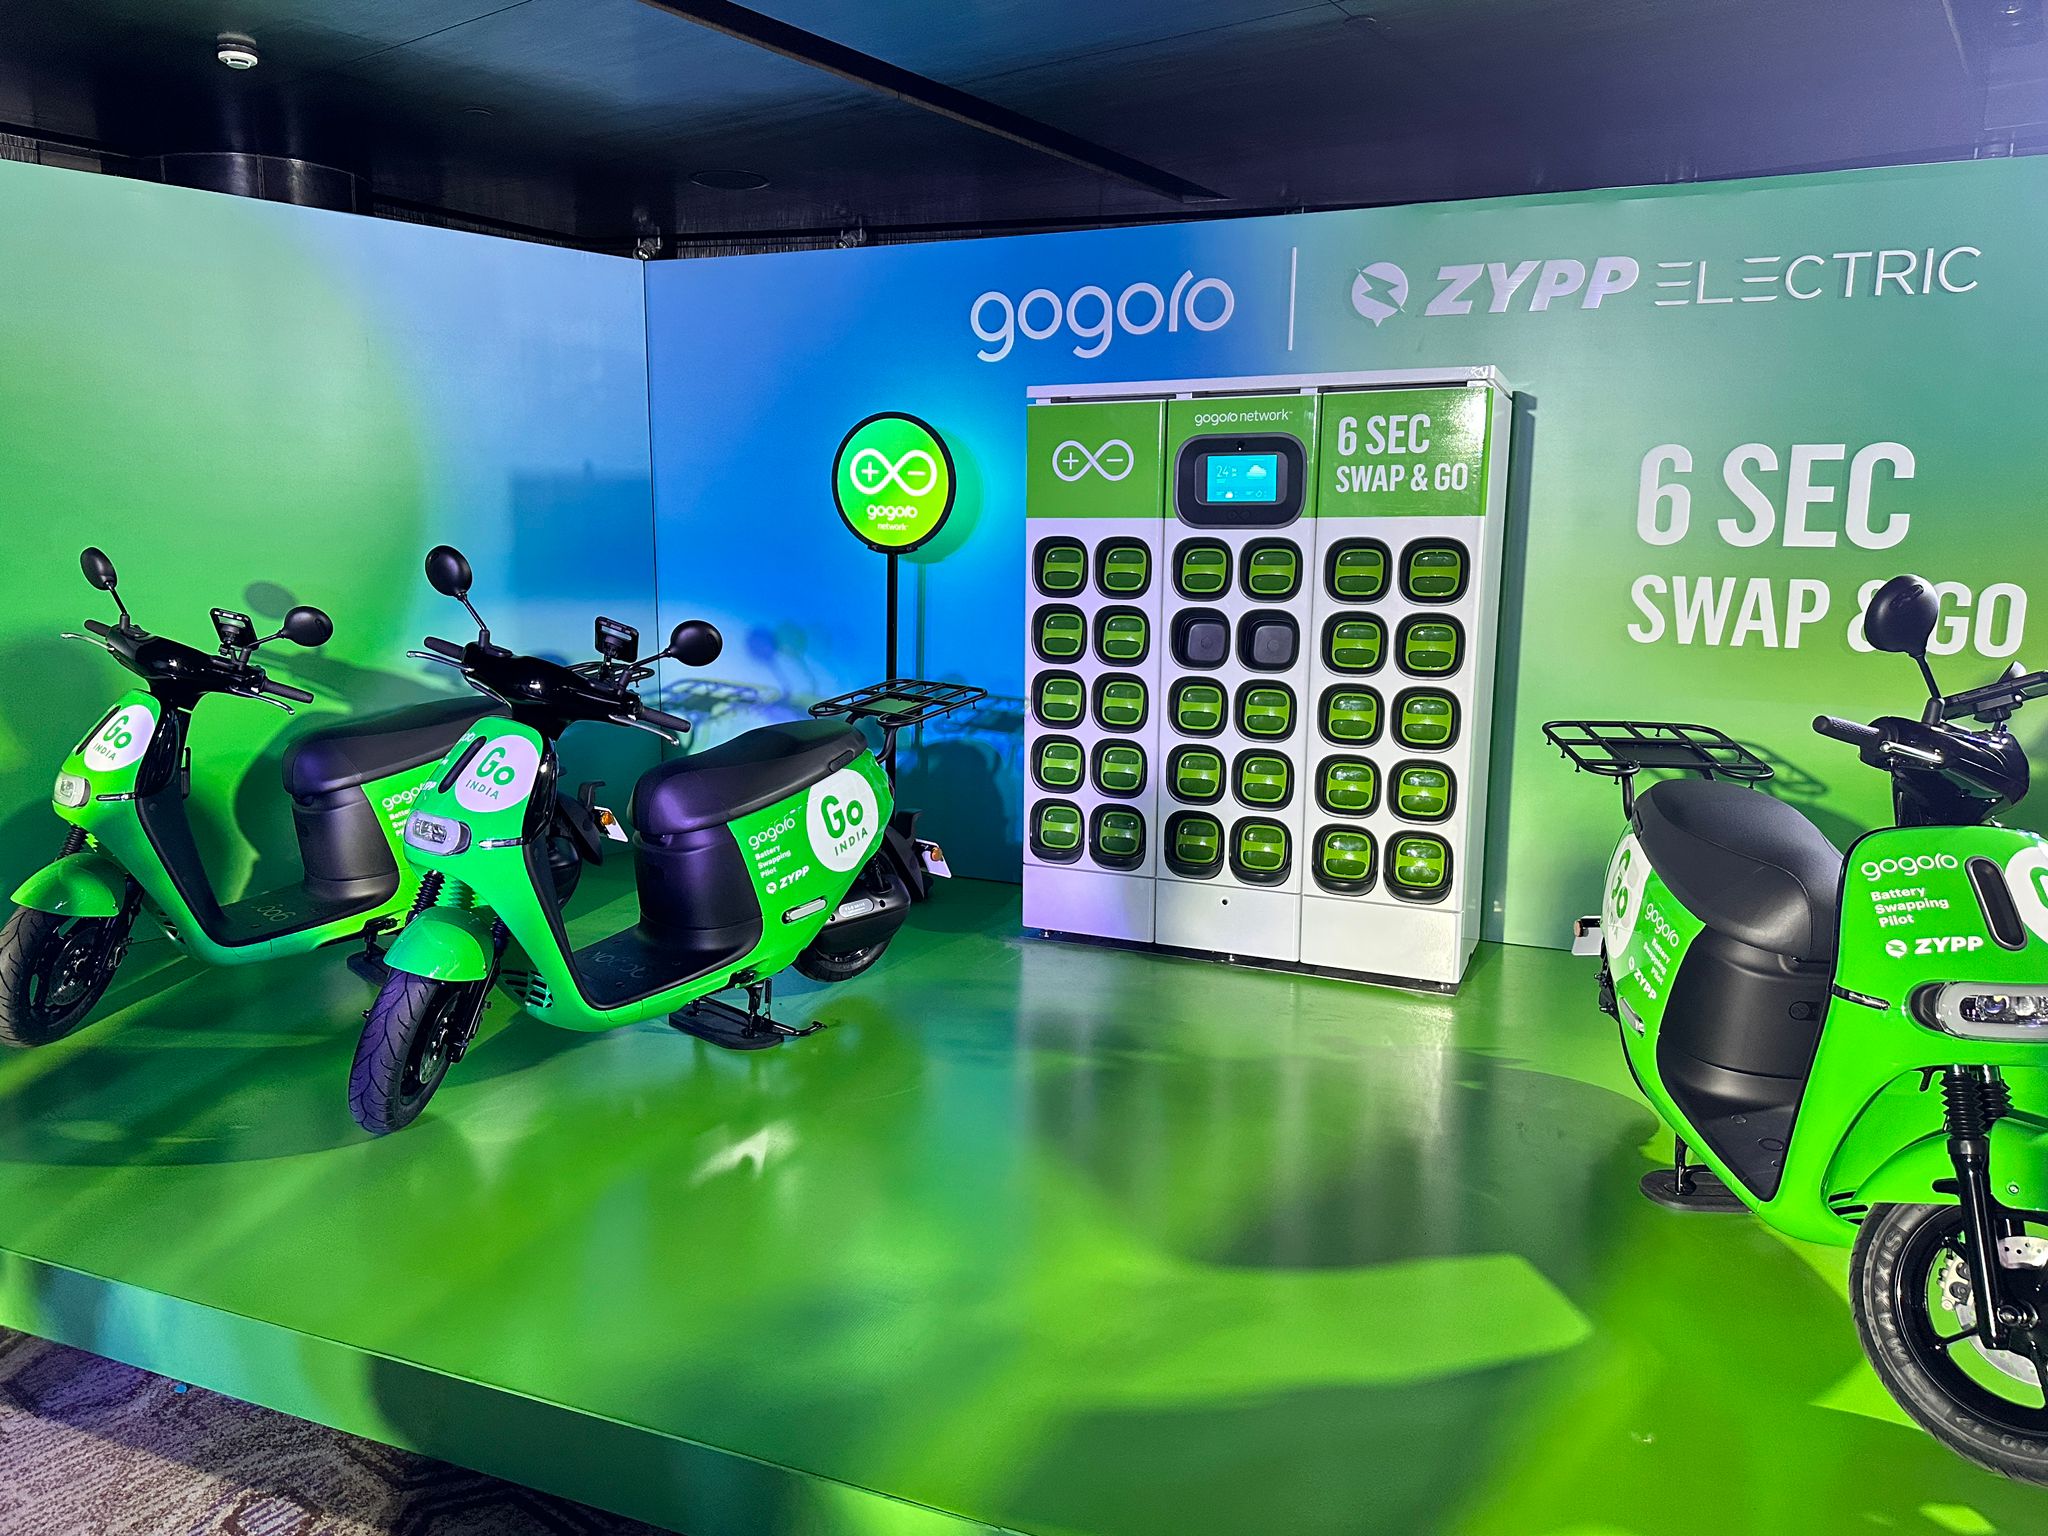 https://e-vehicleinfo.com/gogoro-and-zypp-electric-forged-a-new-strategic-partnership-in-india/